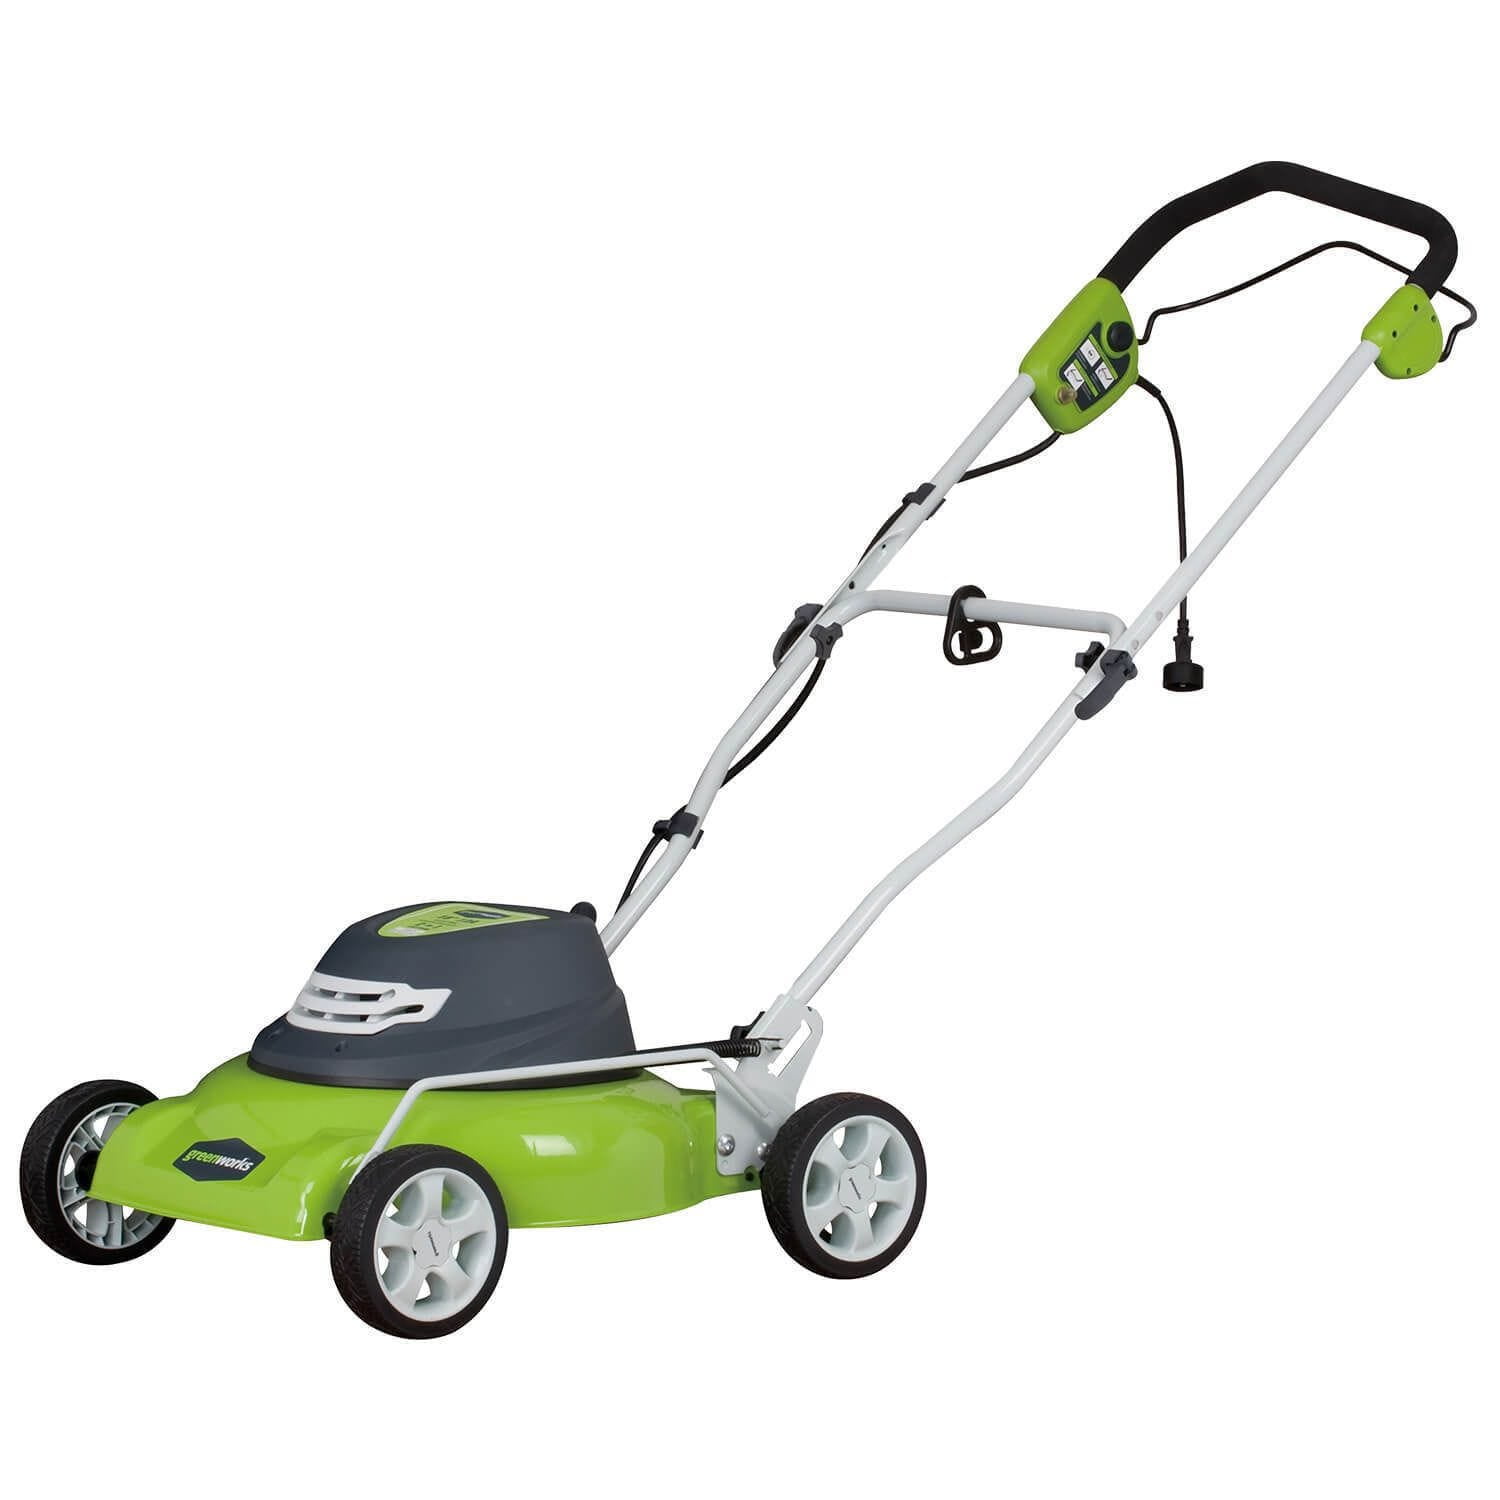 HART 13" Cordless Push Lawn Mower 20v System 4ah Lithium-ion Battery for sale online